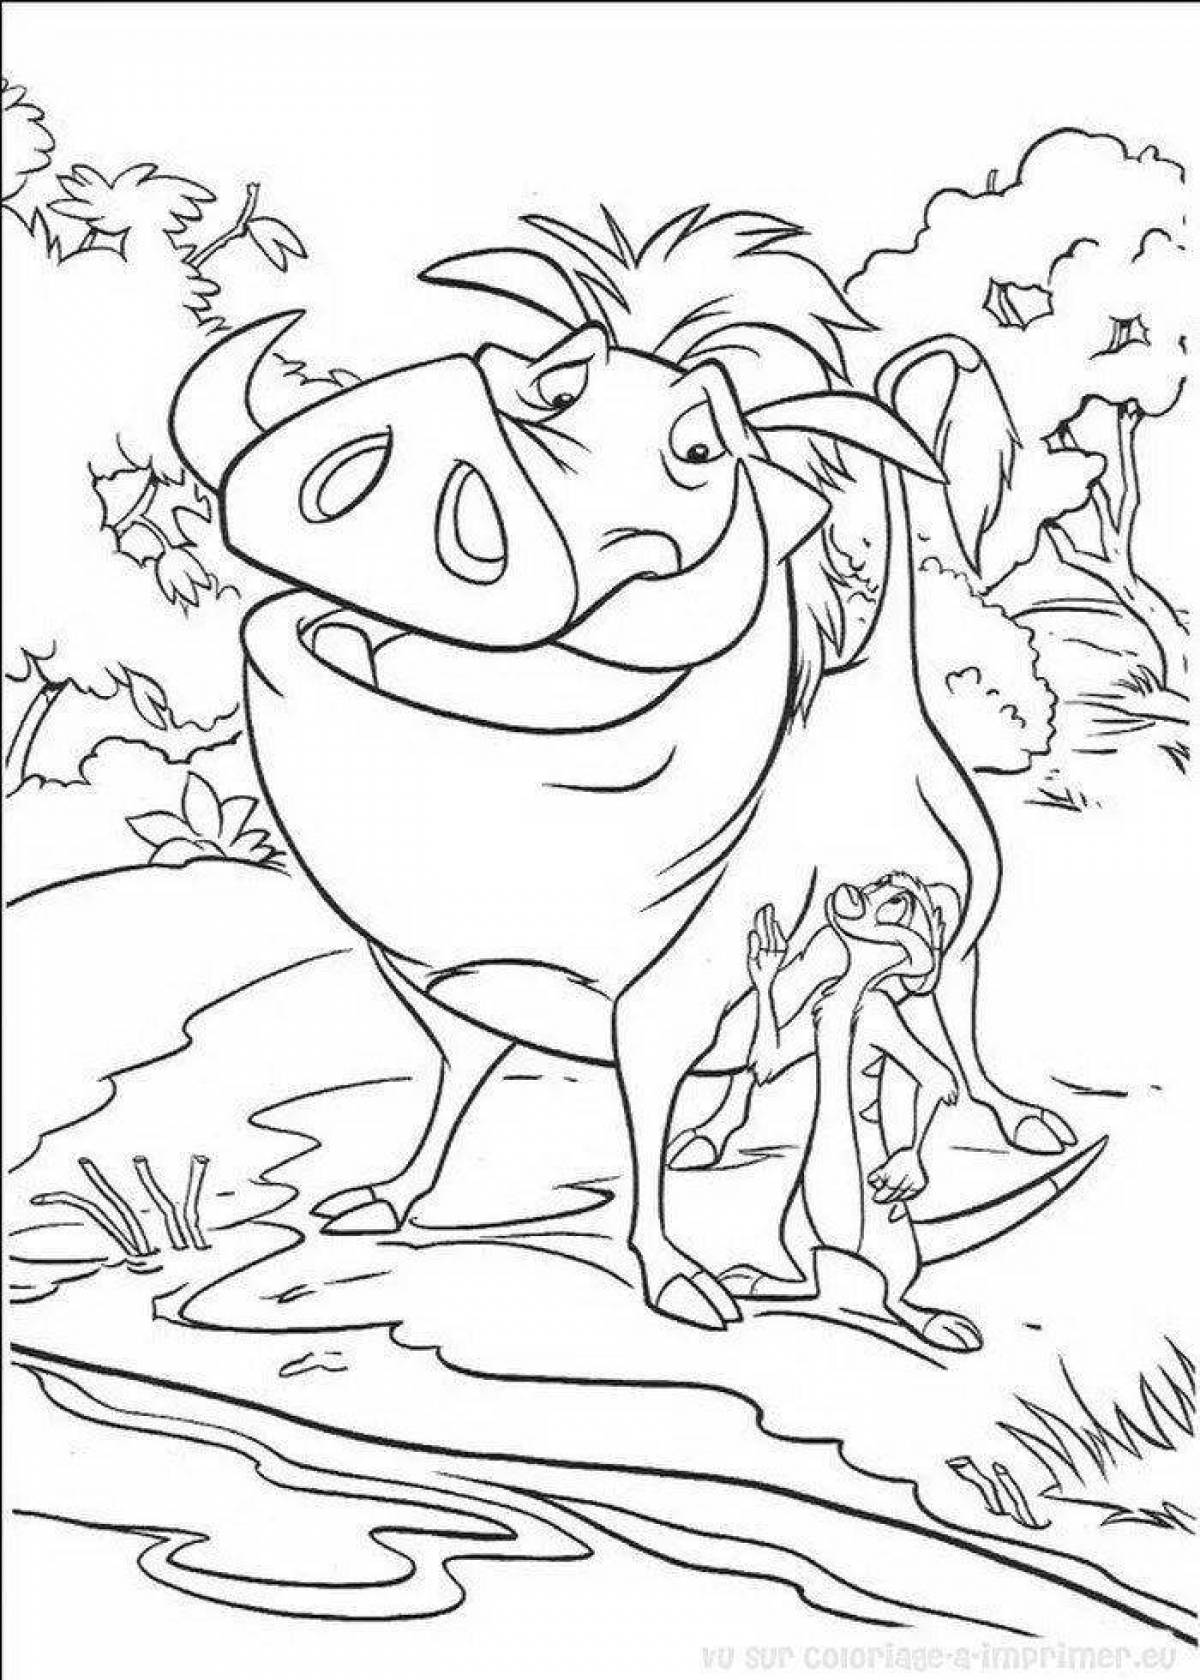 Excellent timon and pumbaa coloring book